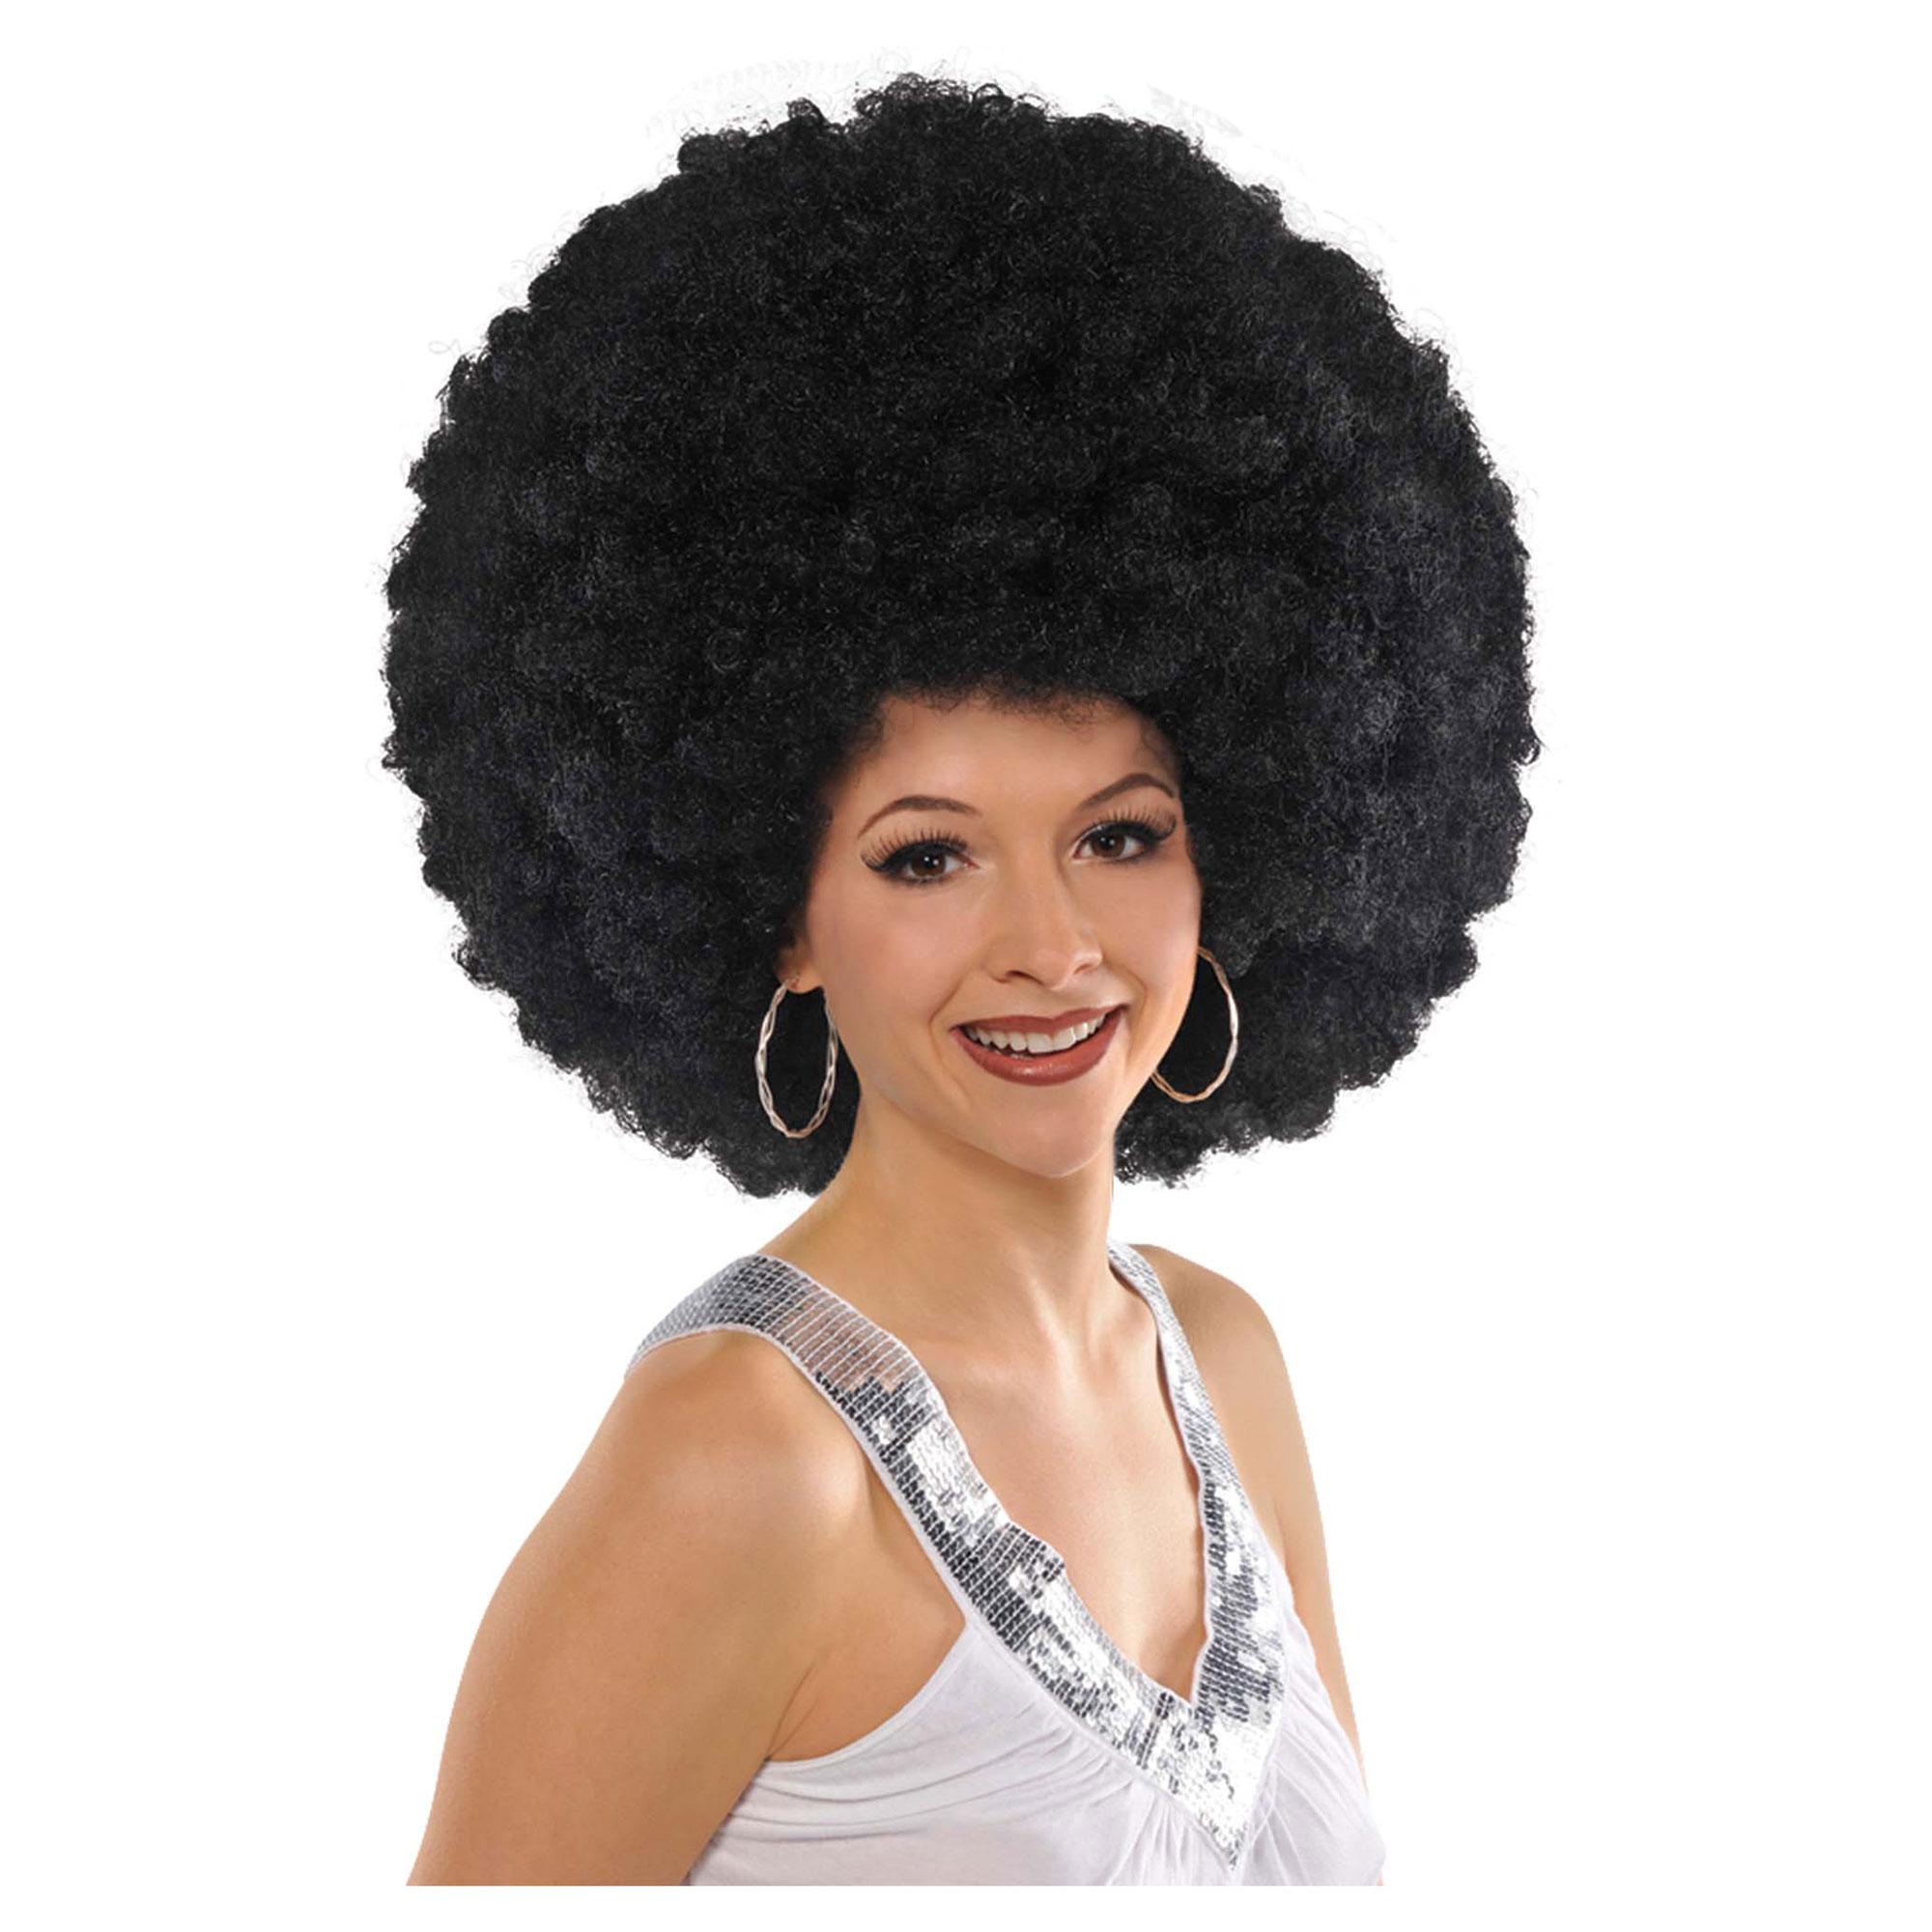 World's Biggest Afro Wig Costumes & Apparel - Party Centre - Party Centre